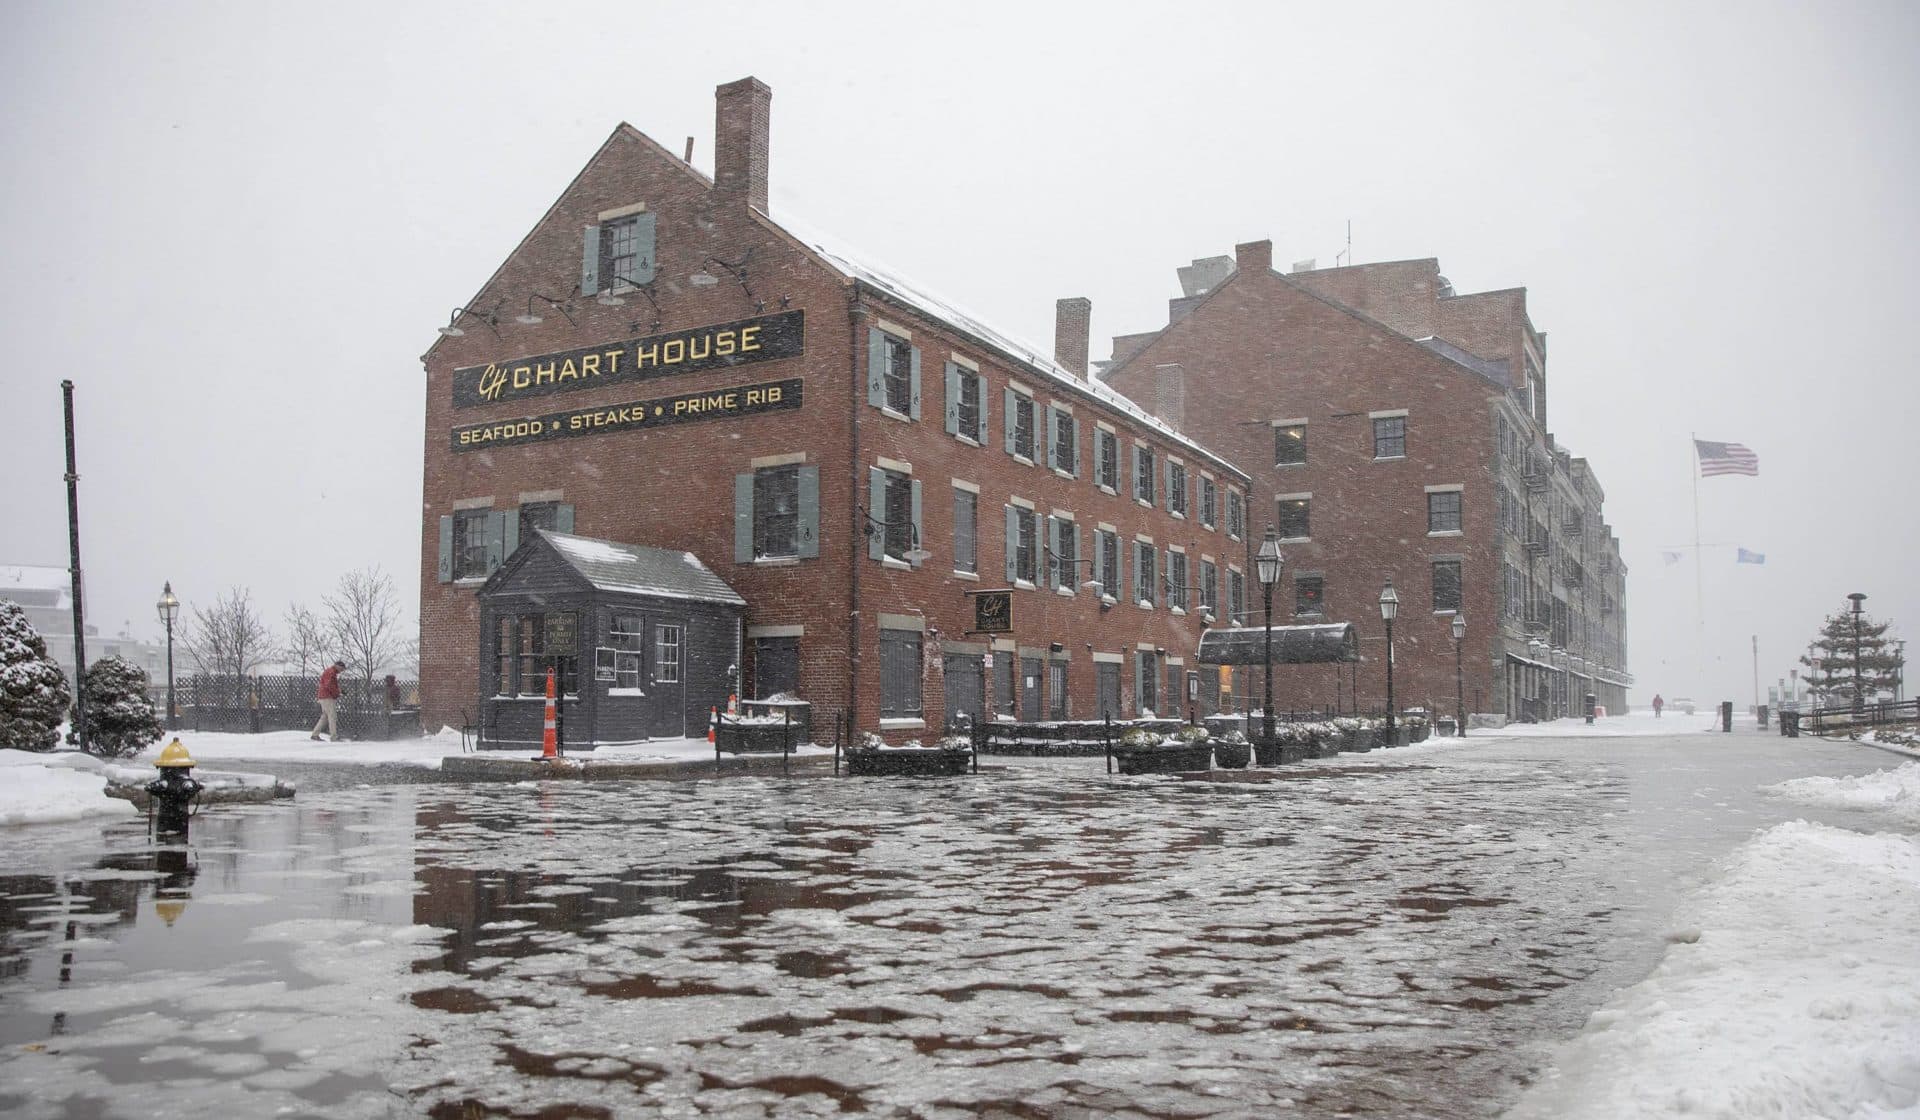 High tide early on Saturday morning during the snow storm creates flooding on Long Wharf by the Chart House. (Robin Lubbock/WBUR)